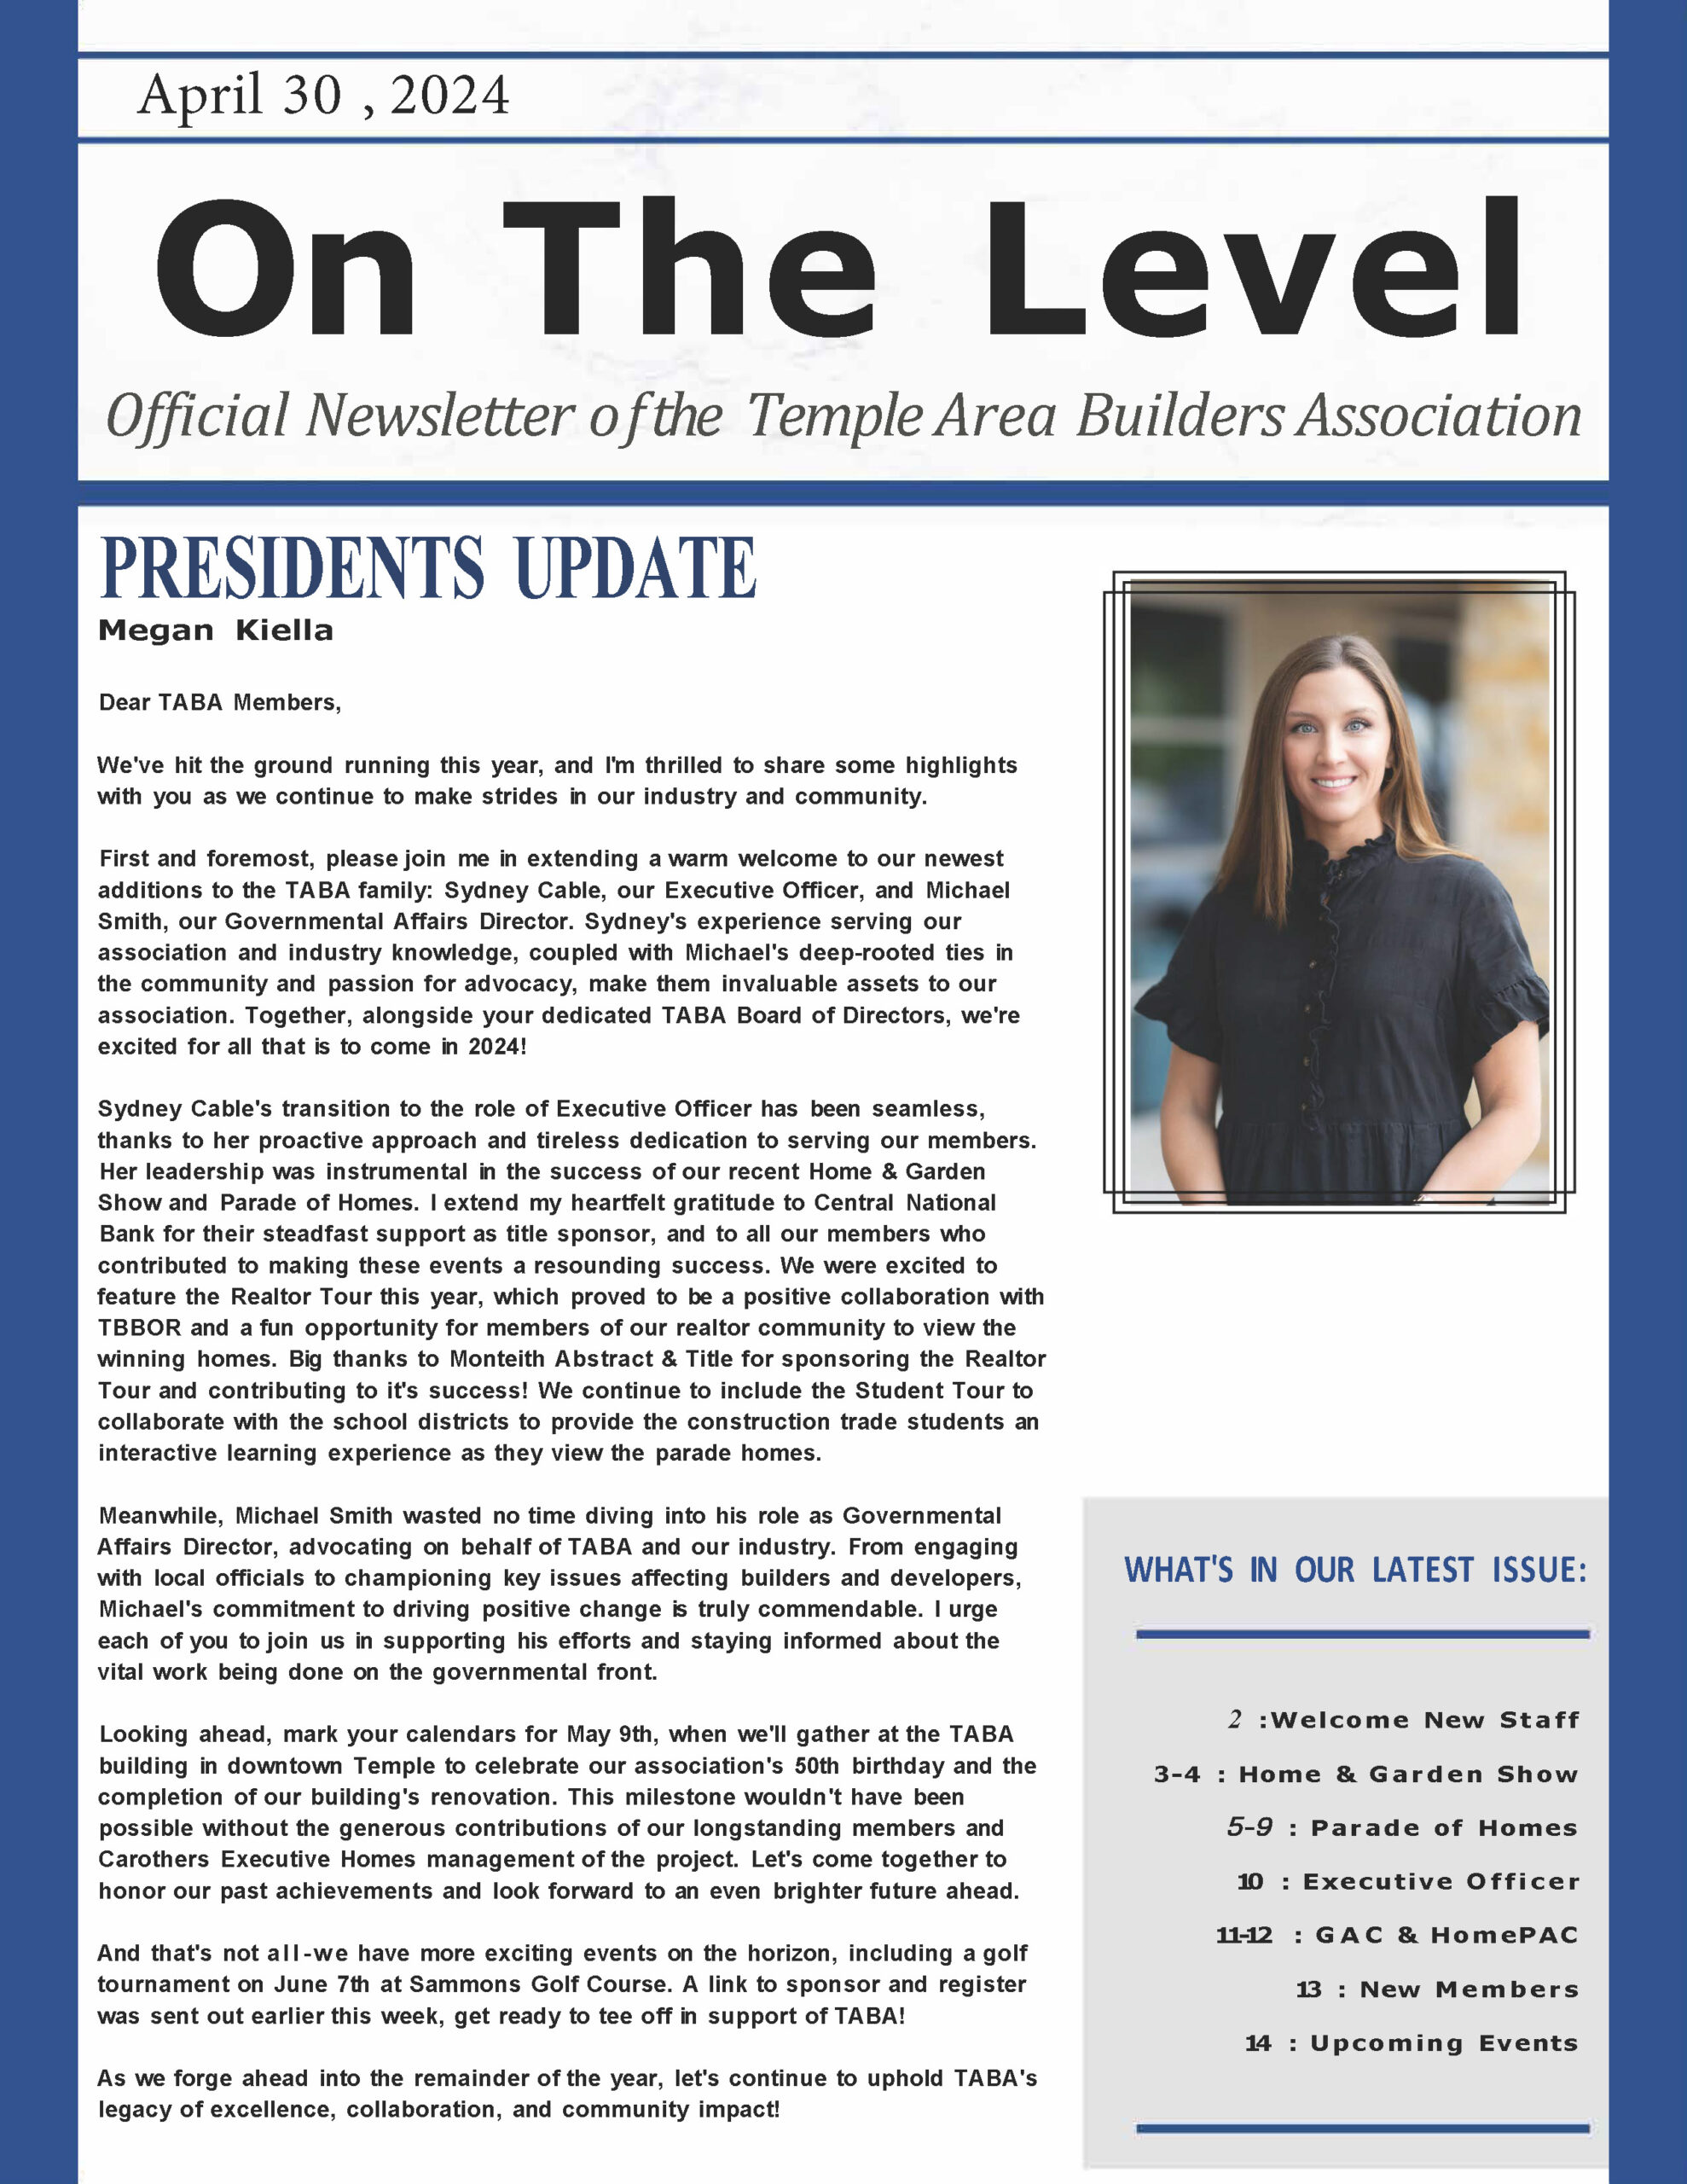 Temple Area Builder's Association - On the Level Newsletter - Cover of April 30, 2024 Edition